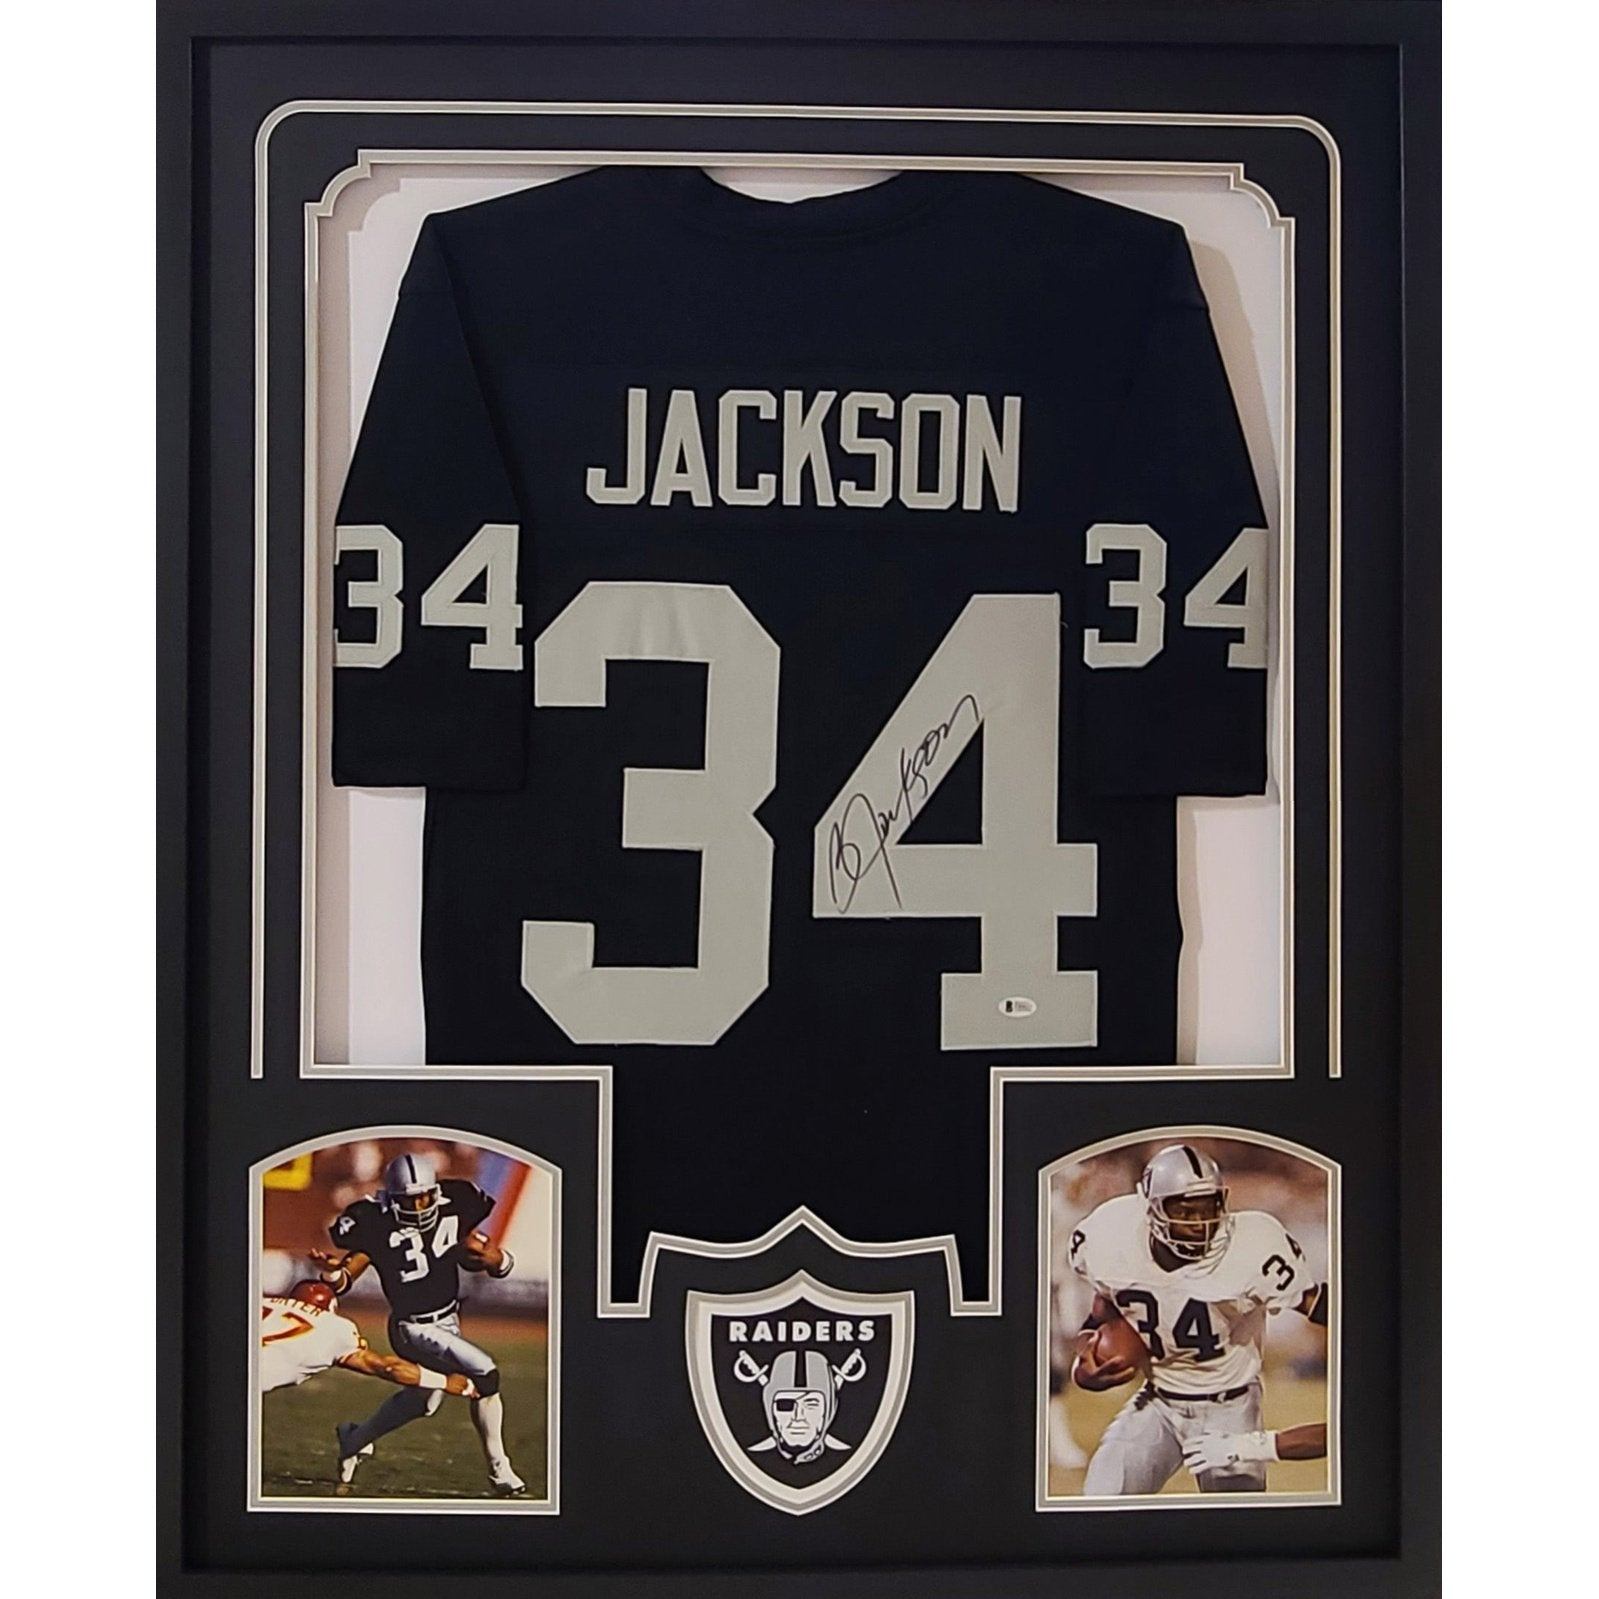 Bo Jackson Autographed Oakland Raiders (White #34) Deluxe Framed Jerse –  Palm Beach Autographs LLC